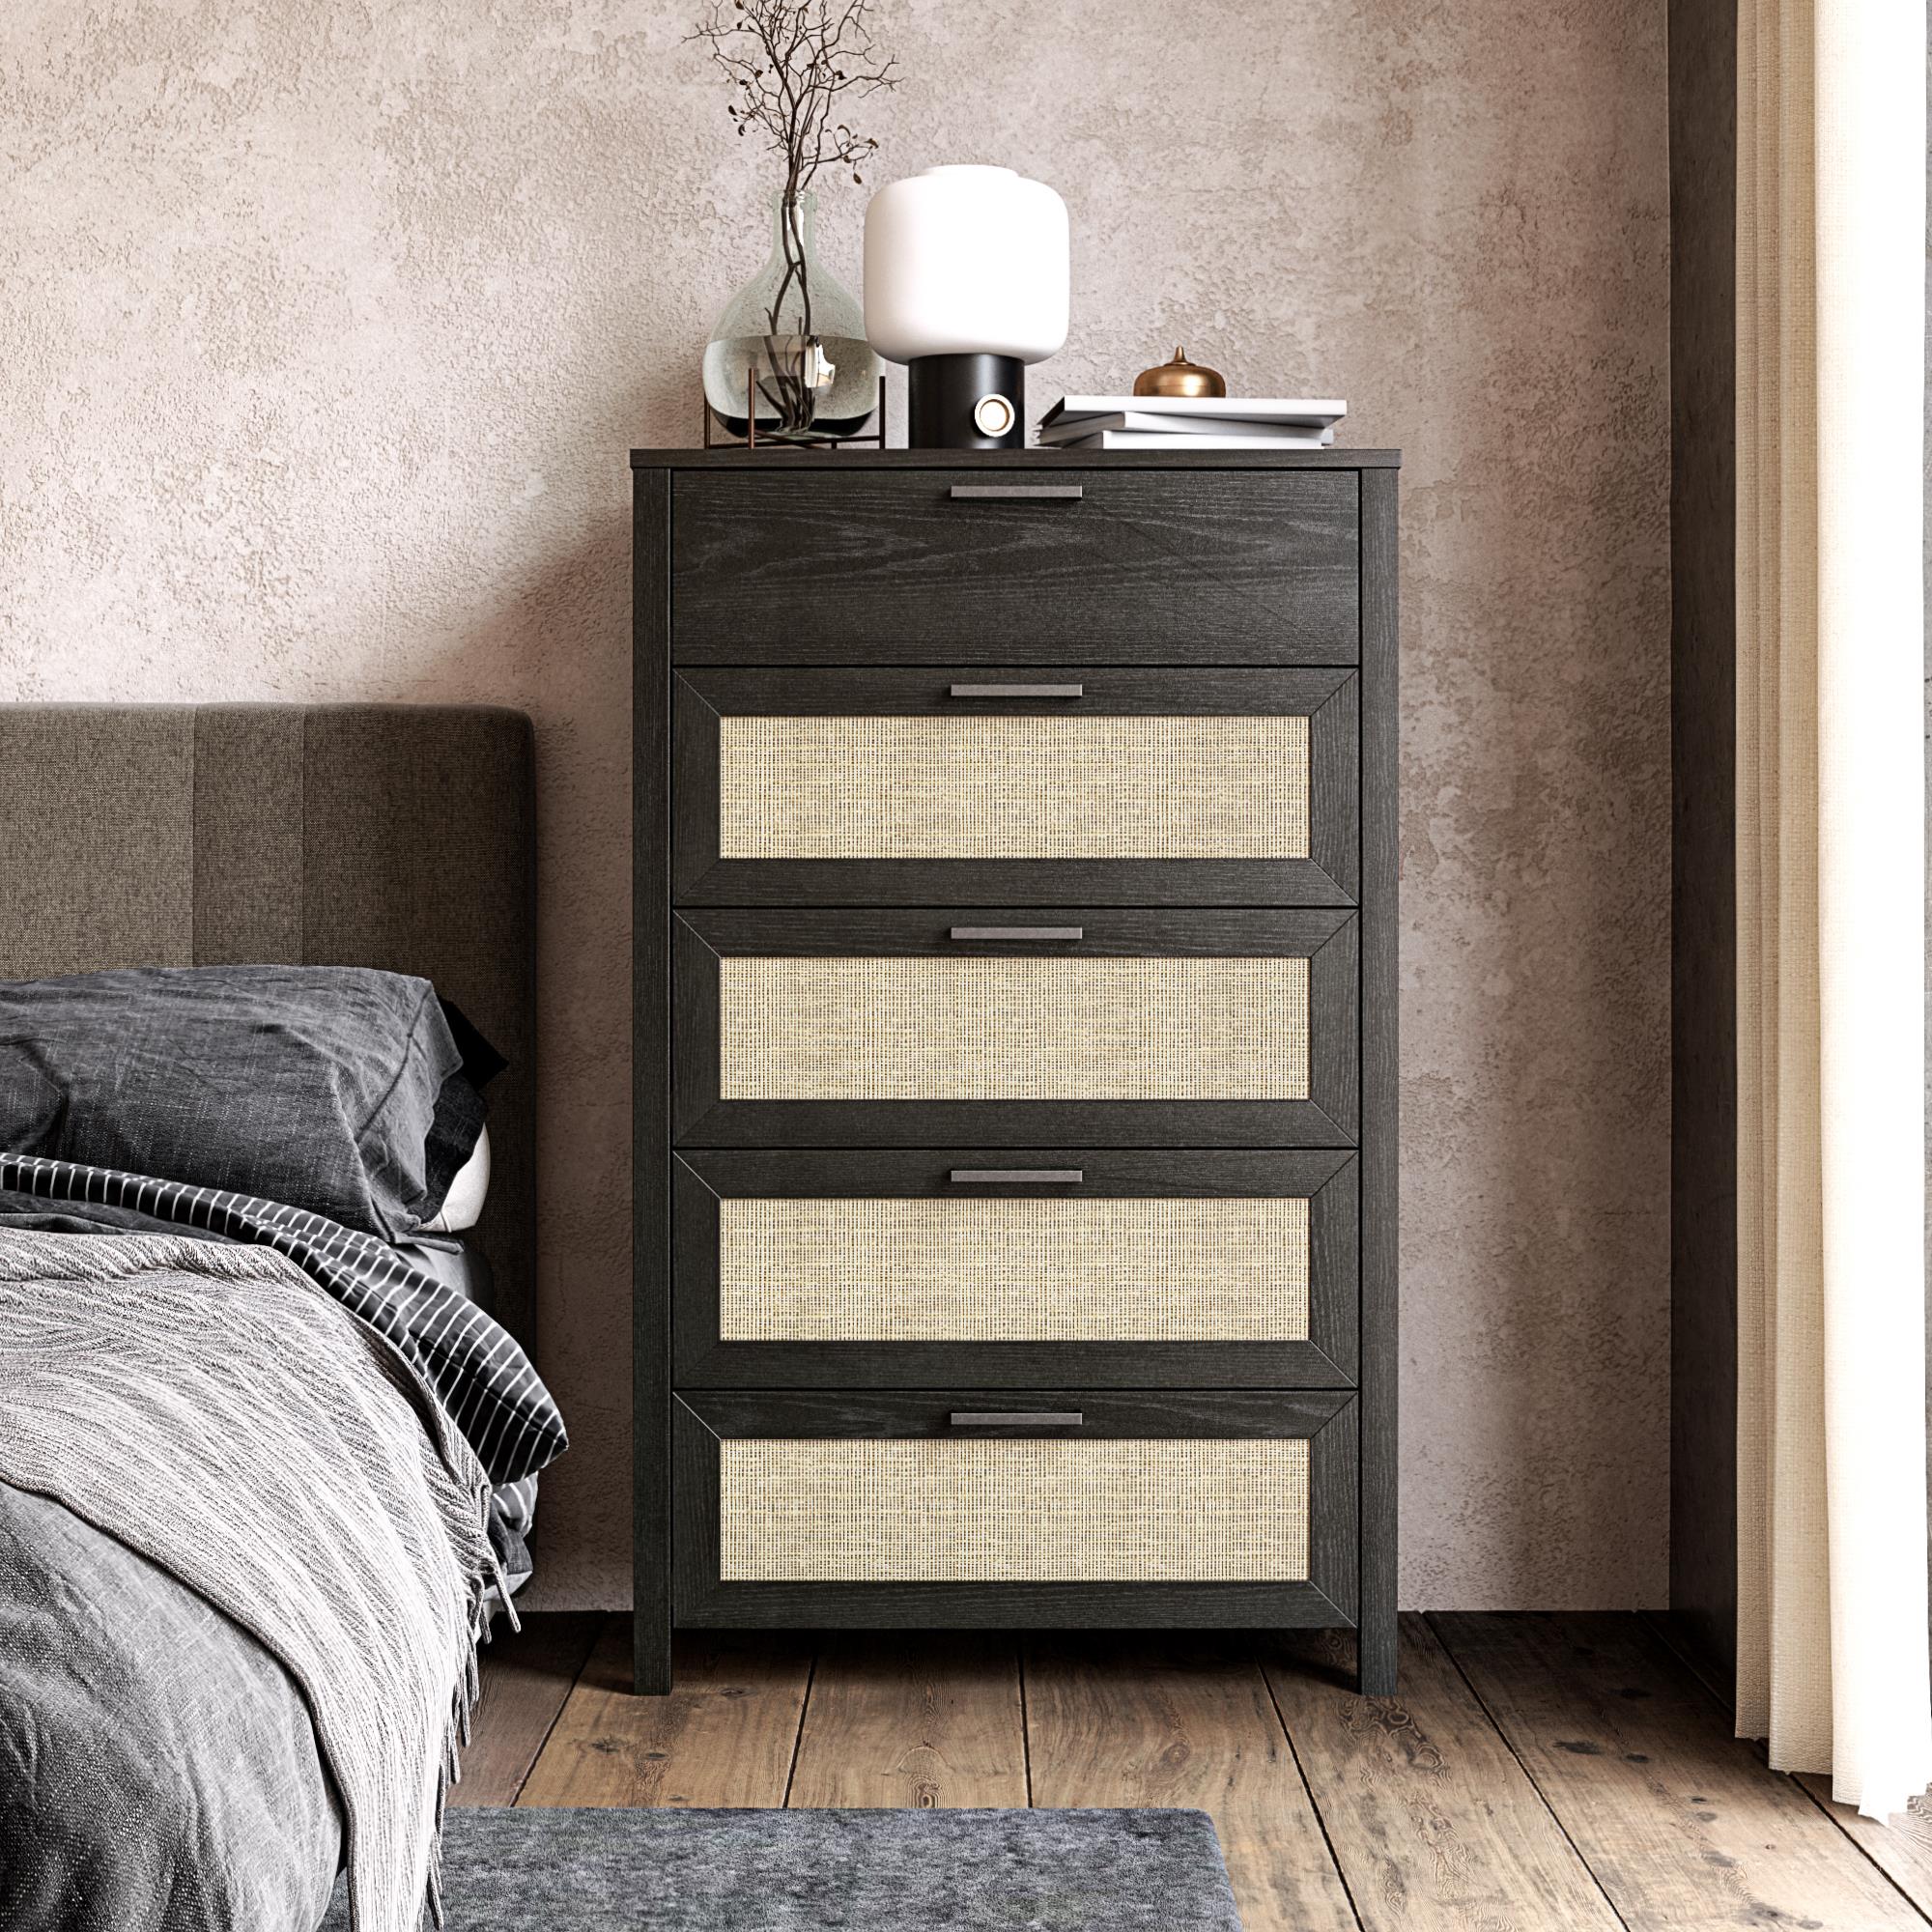 Ameriwood Home Wimberly 5-Drawer Dresser, Black Oak with Faux Rattan - image 1 of 14